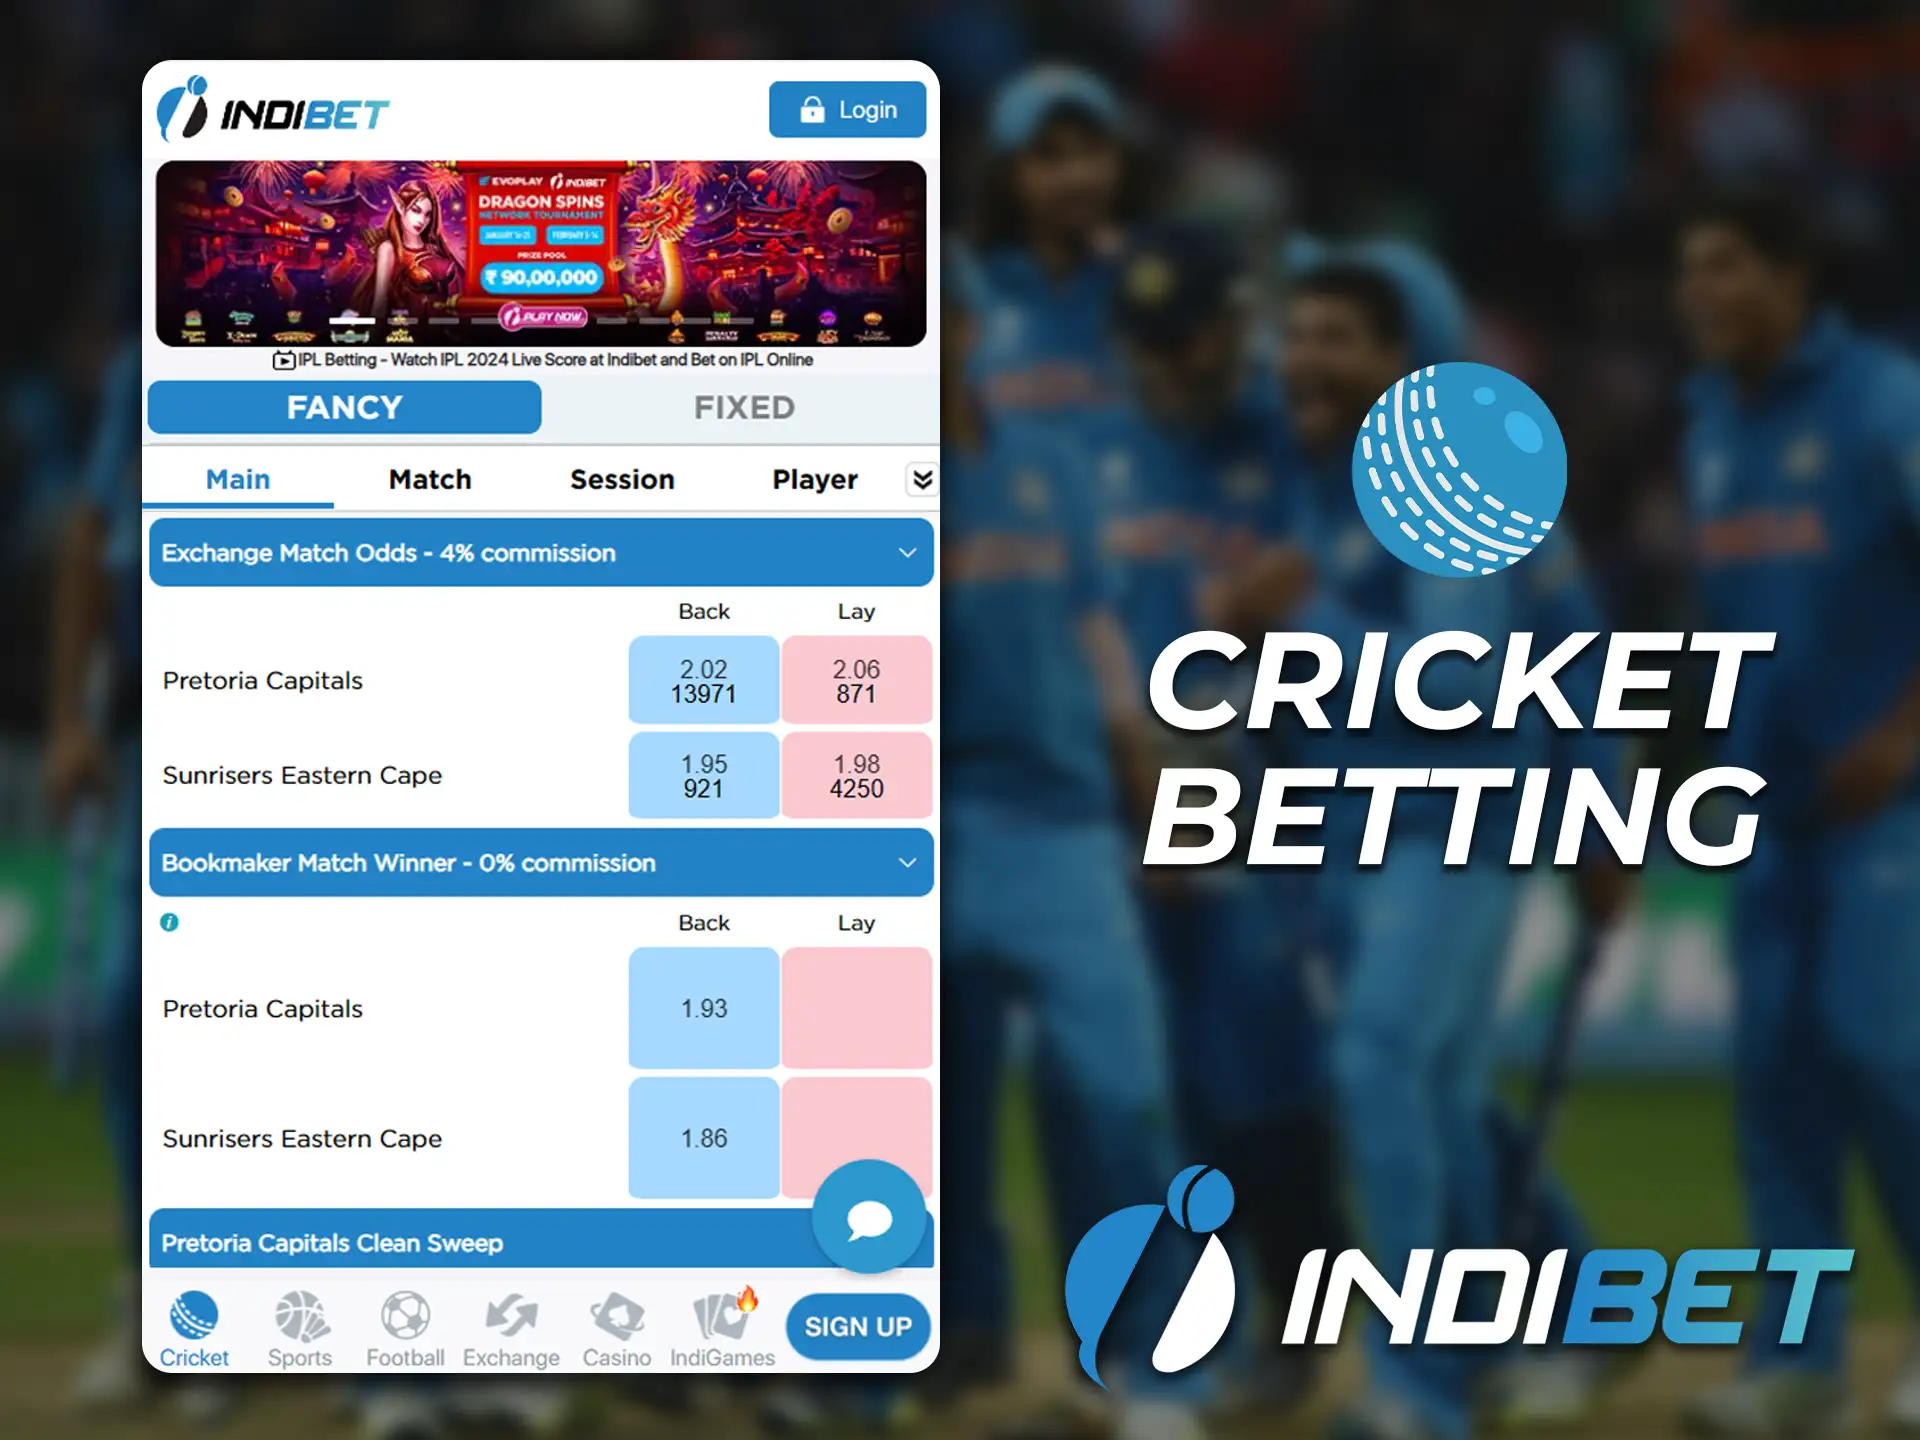 Place your bets on popular cricket tournaments on the Indibet app.